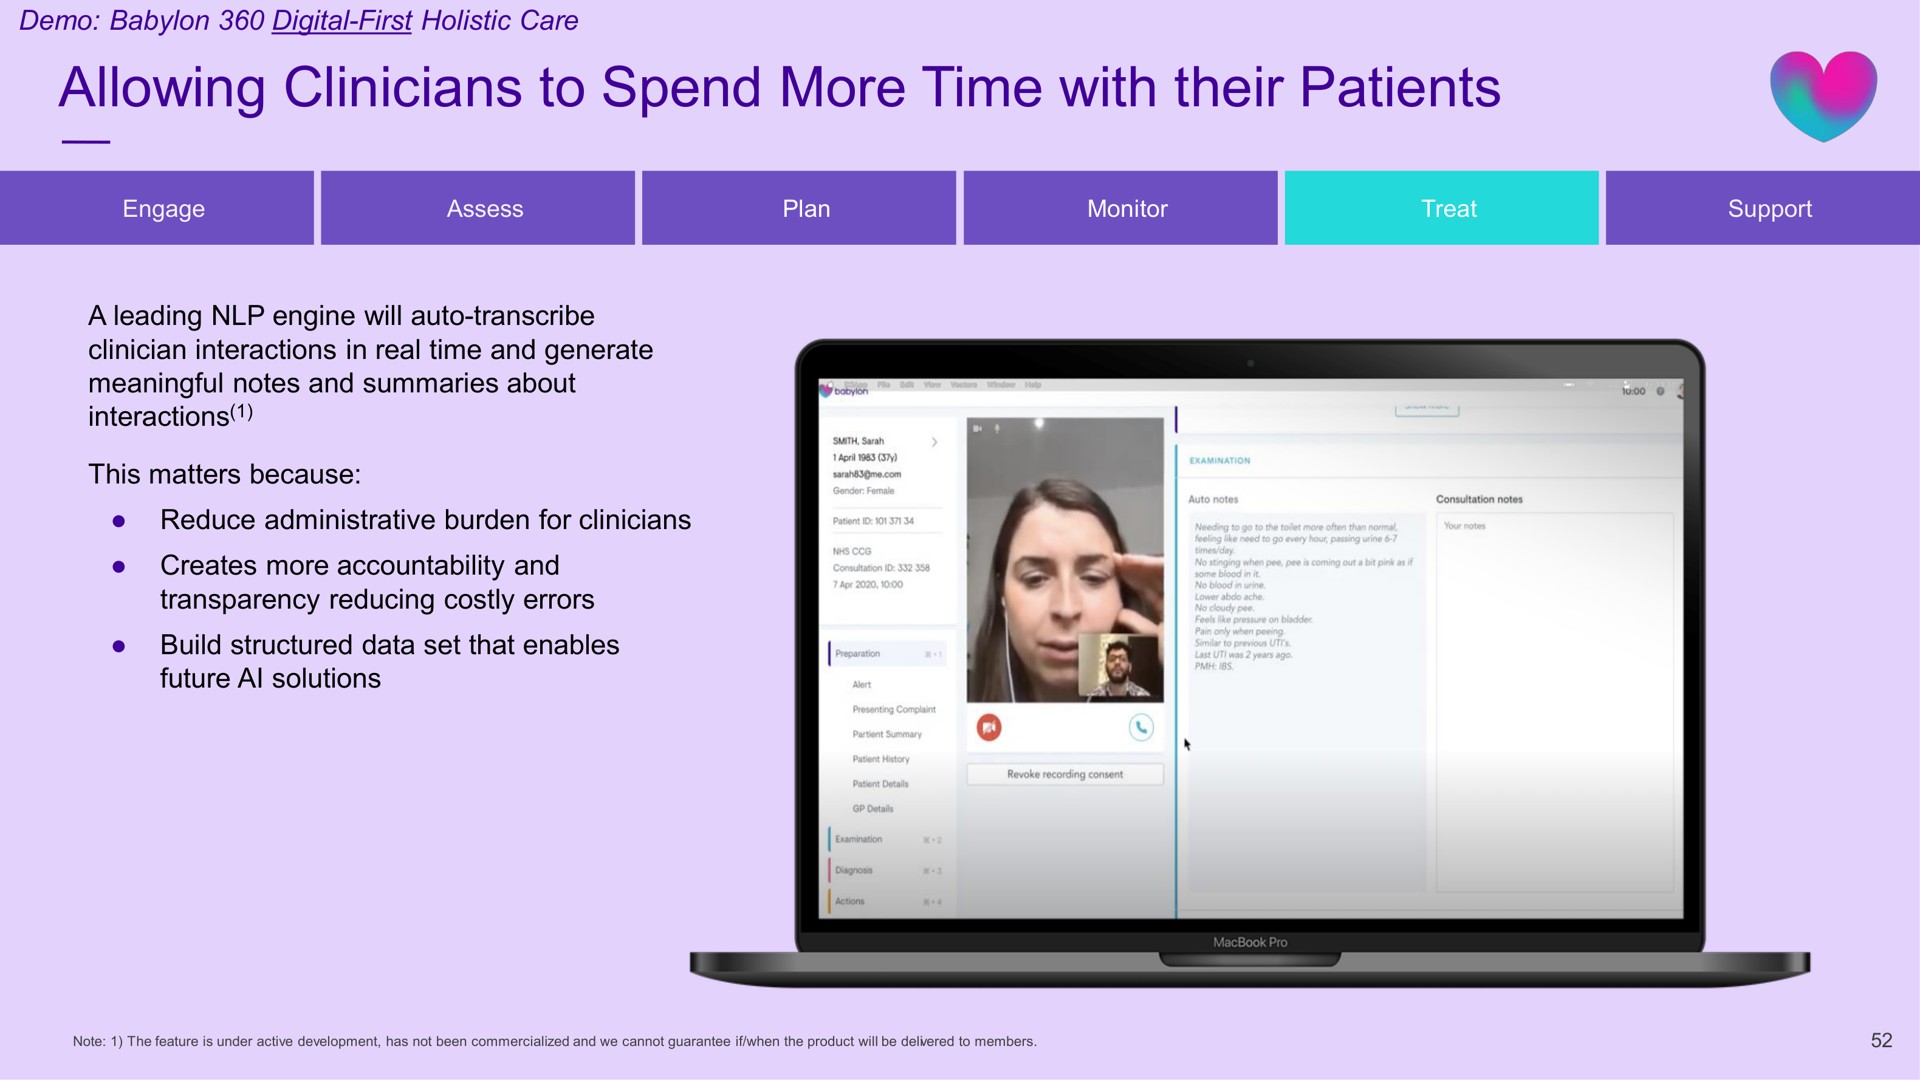 allowing clinicians to spend more time with their patients | Babylon